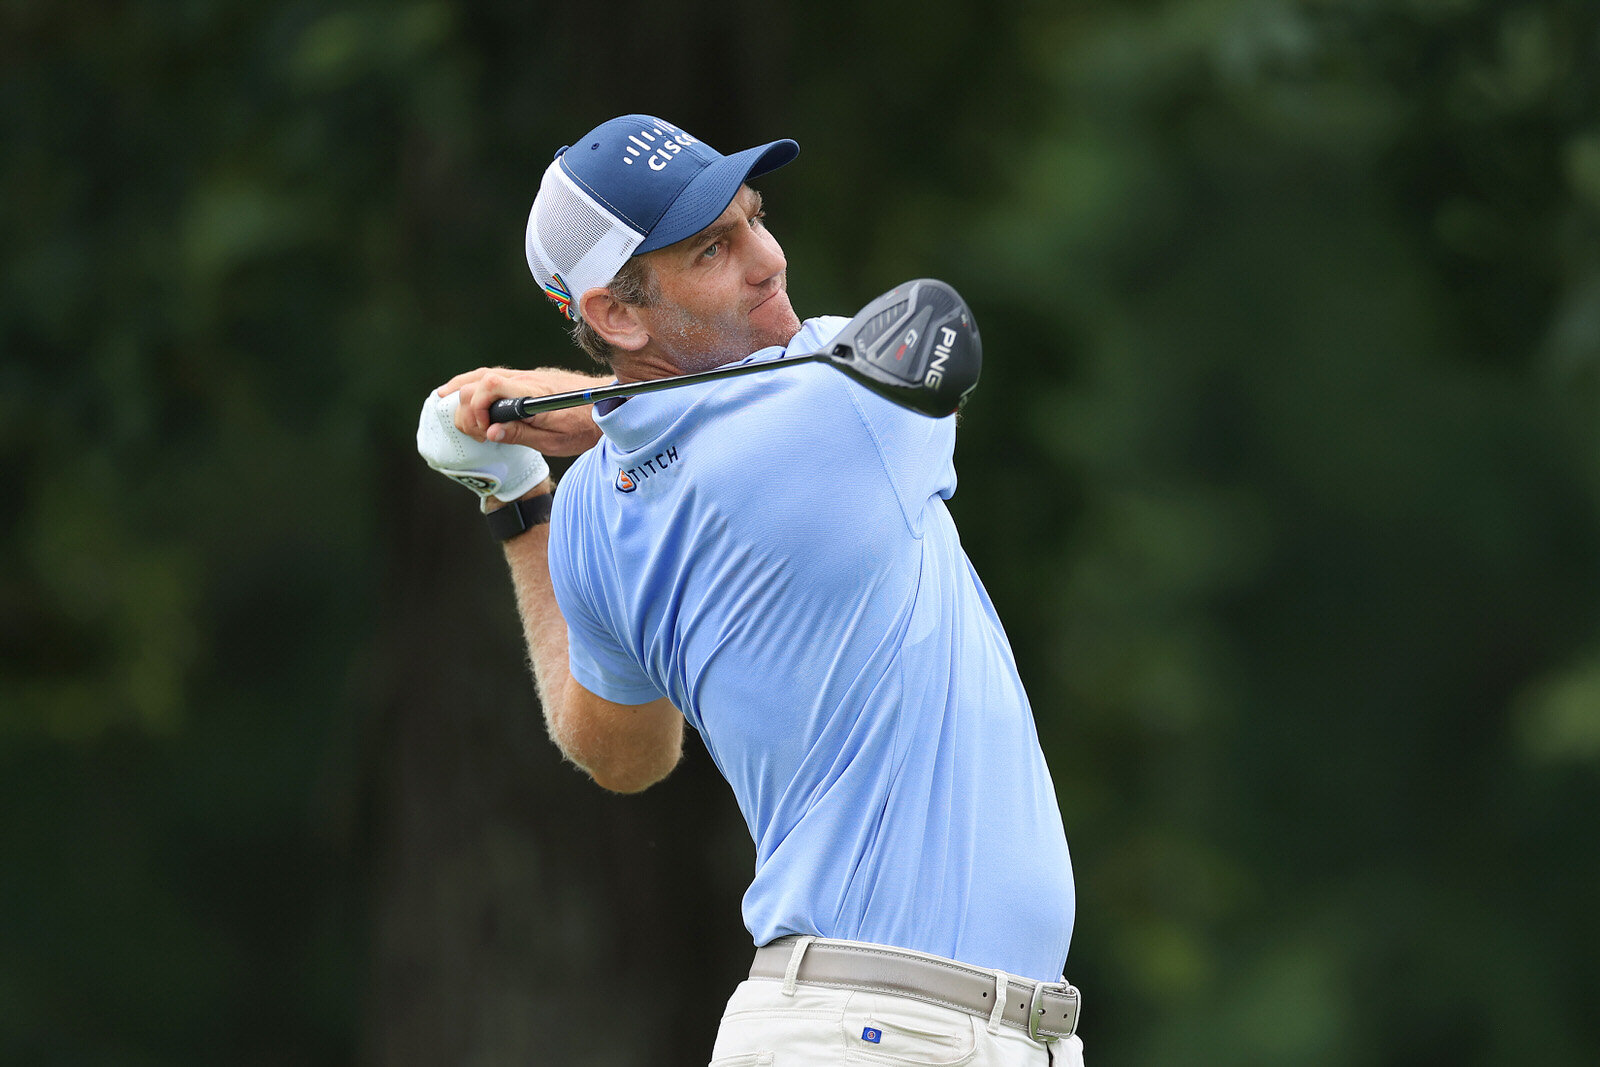  MEMPHIS, TENNESSEE - JULY 31: Brendon Todd of the United States plays his shot from the 13th tee during the second round of the World Golf Championship-FedEx St Jude Invitational at TPC Southwind on July 31, 2020 in Memphis, Tennessee. (Photo by And